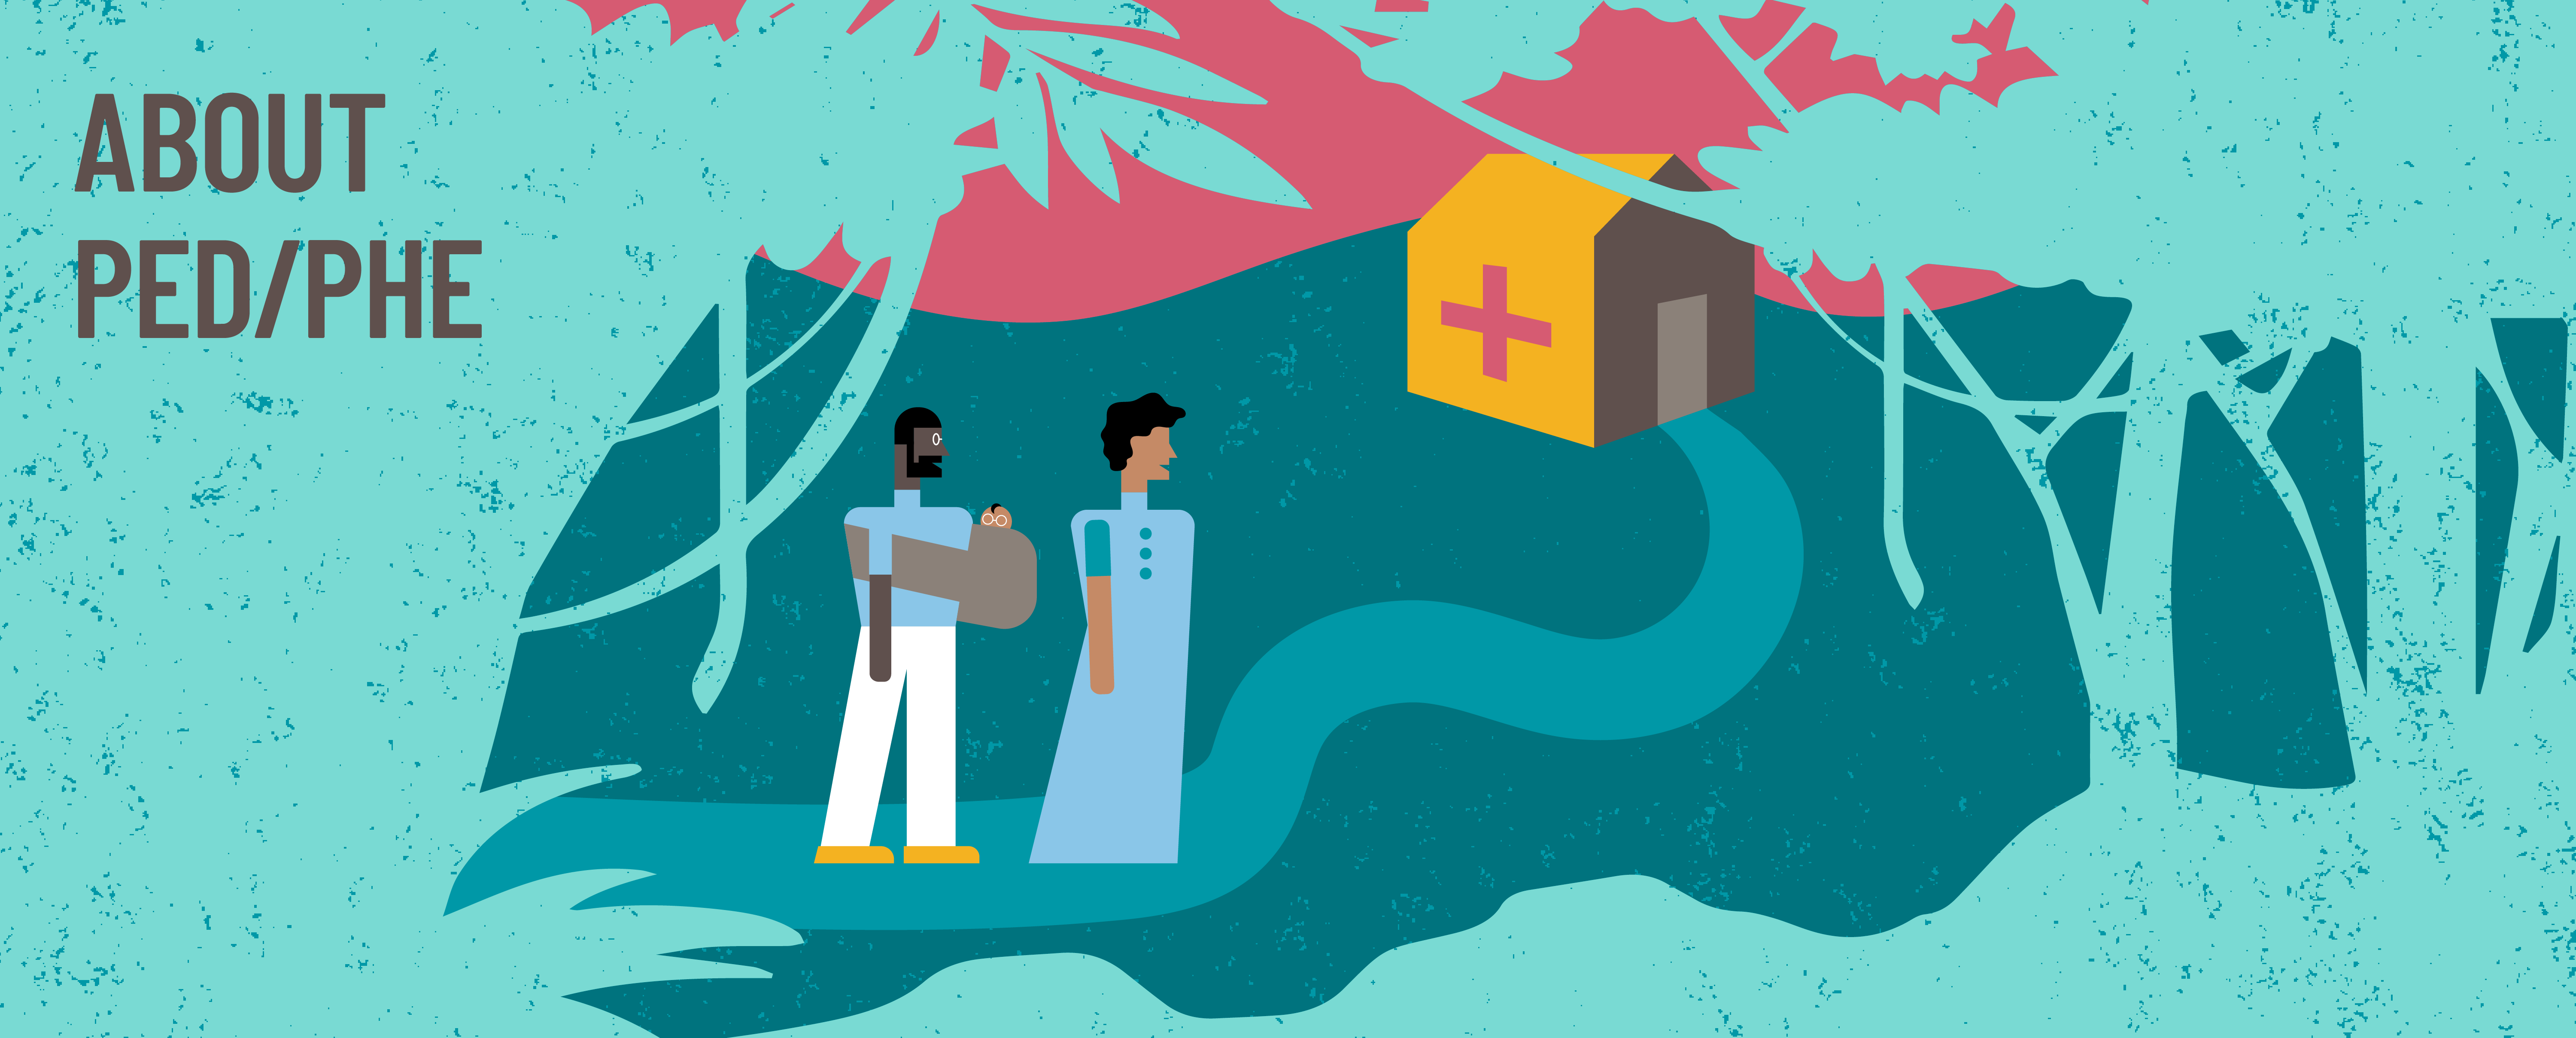 A vector graphic of a couple and their baby walking to a rural health clinic. The text reads: "About PED/PHE"